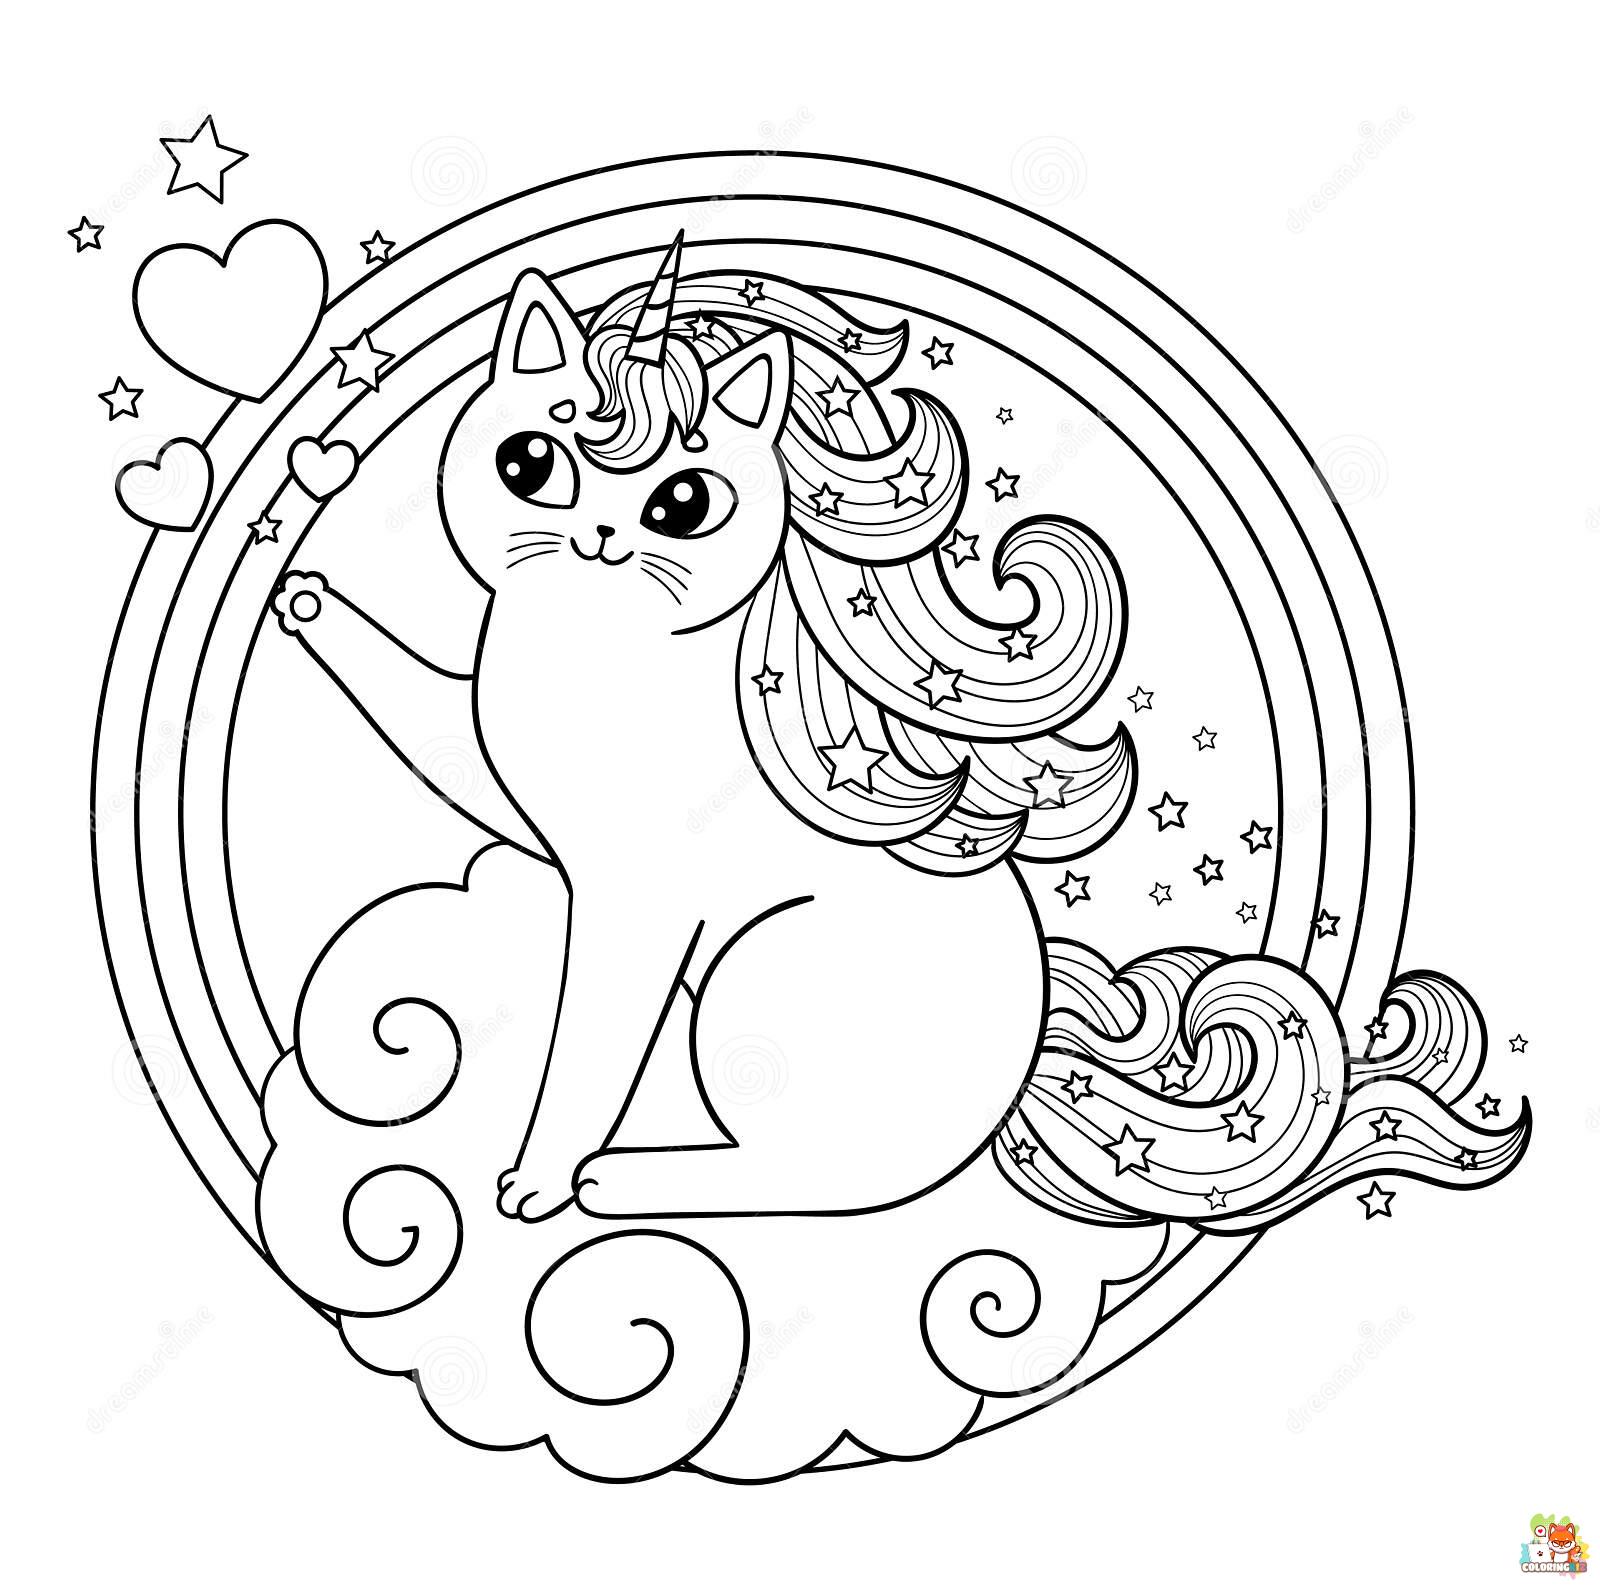 Unicorn Cat Coloring Pages 4